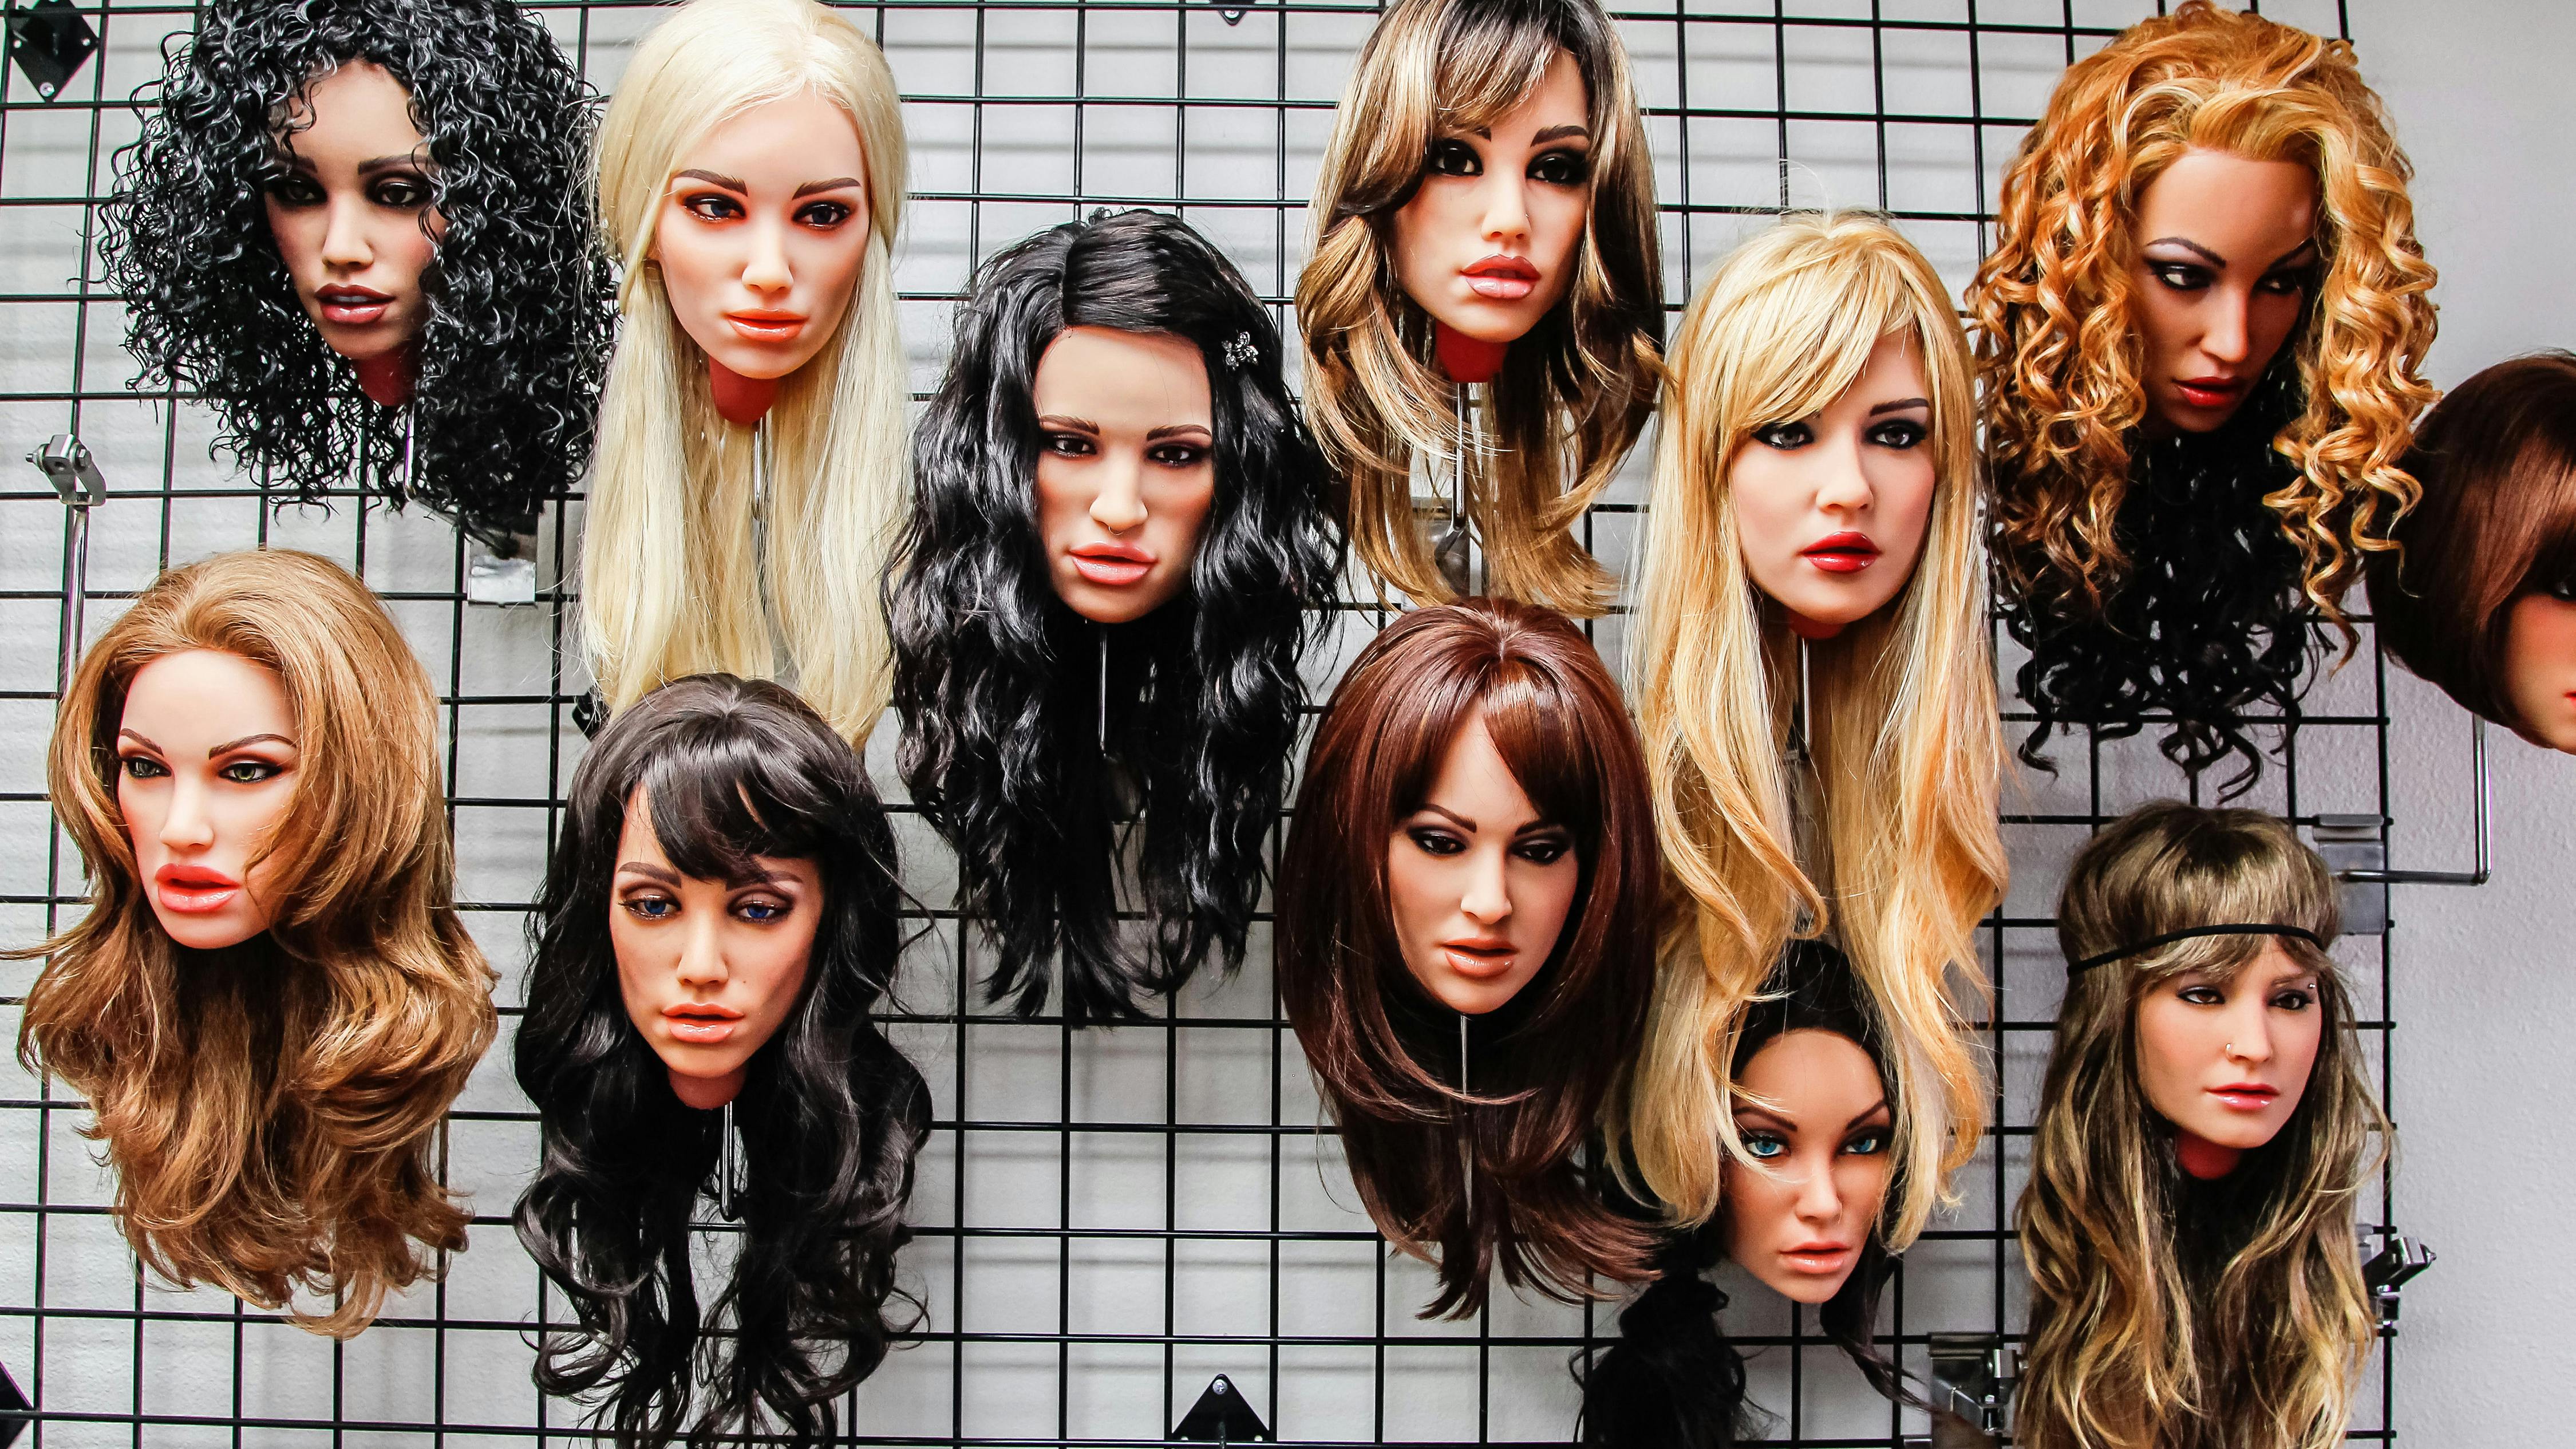 These are some of the Real Doll heads made by Abyss Creations on display on Tuesday in San Marcos, California.  (Eduardo Contreras/San Diego Union-Tribune/TNS) Newscom/(Mega Agency TagID: krtphotoslive801995.jpg) [Photo via Mega Agency]